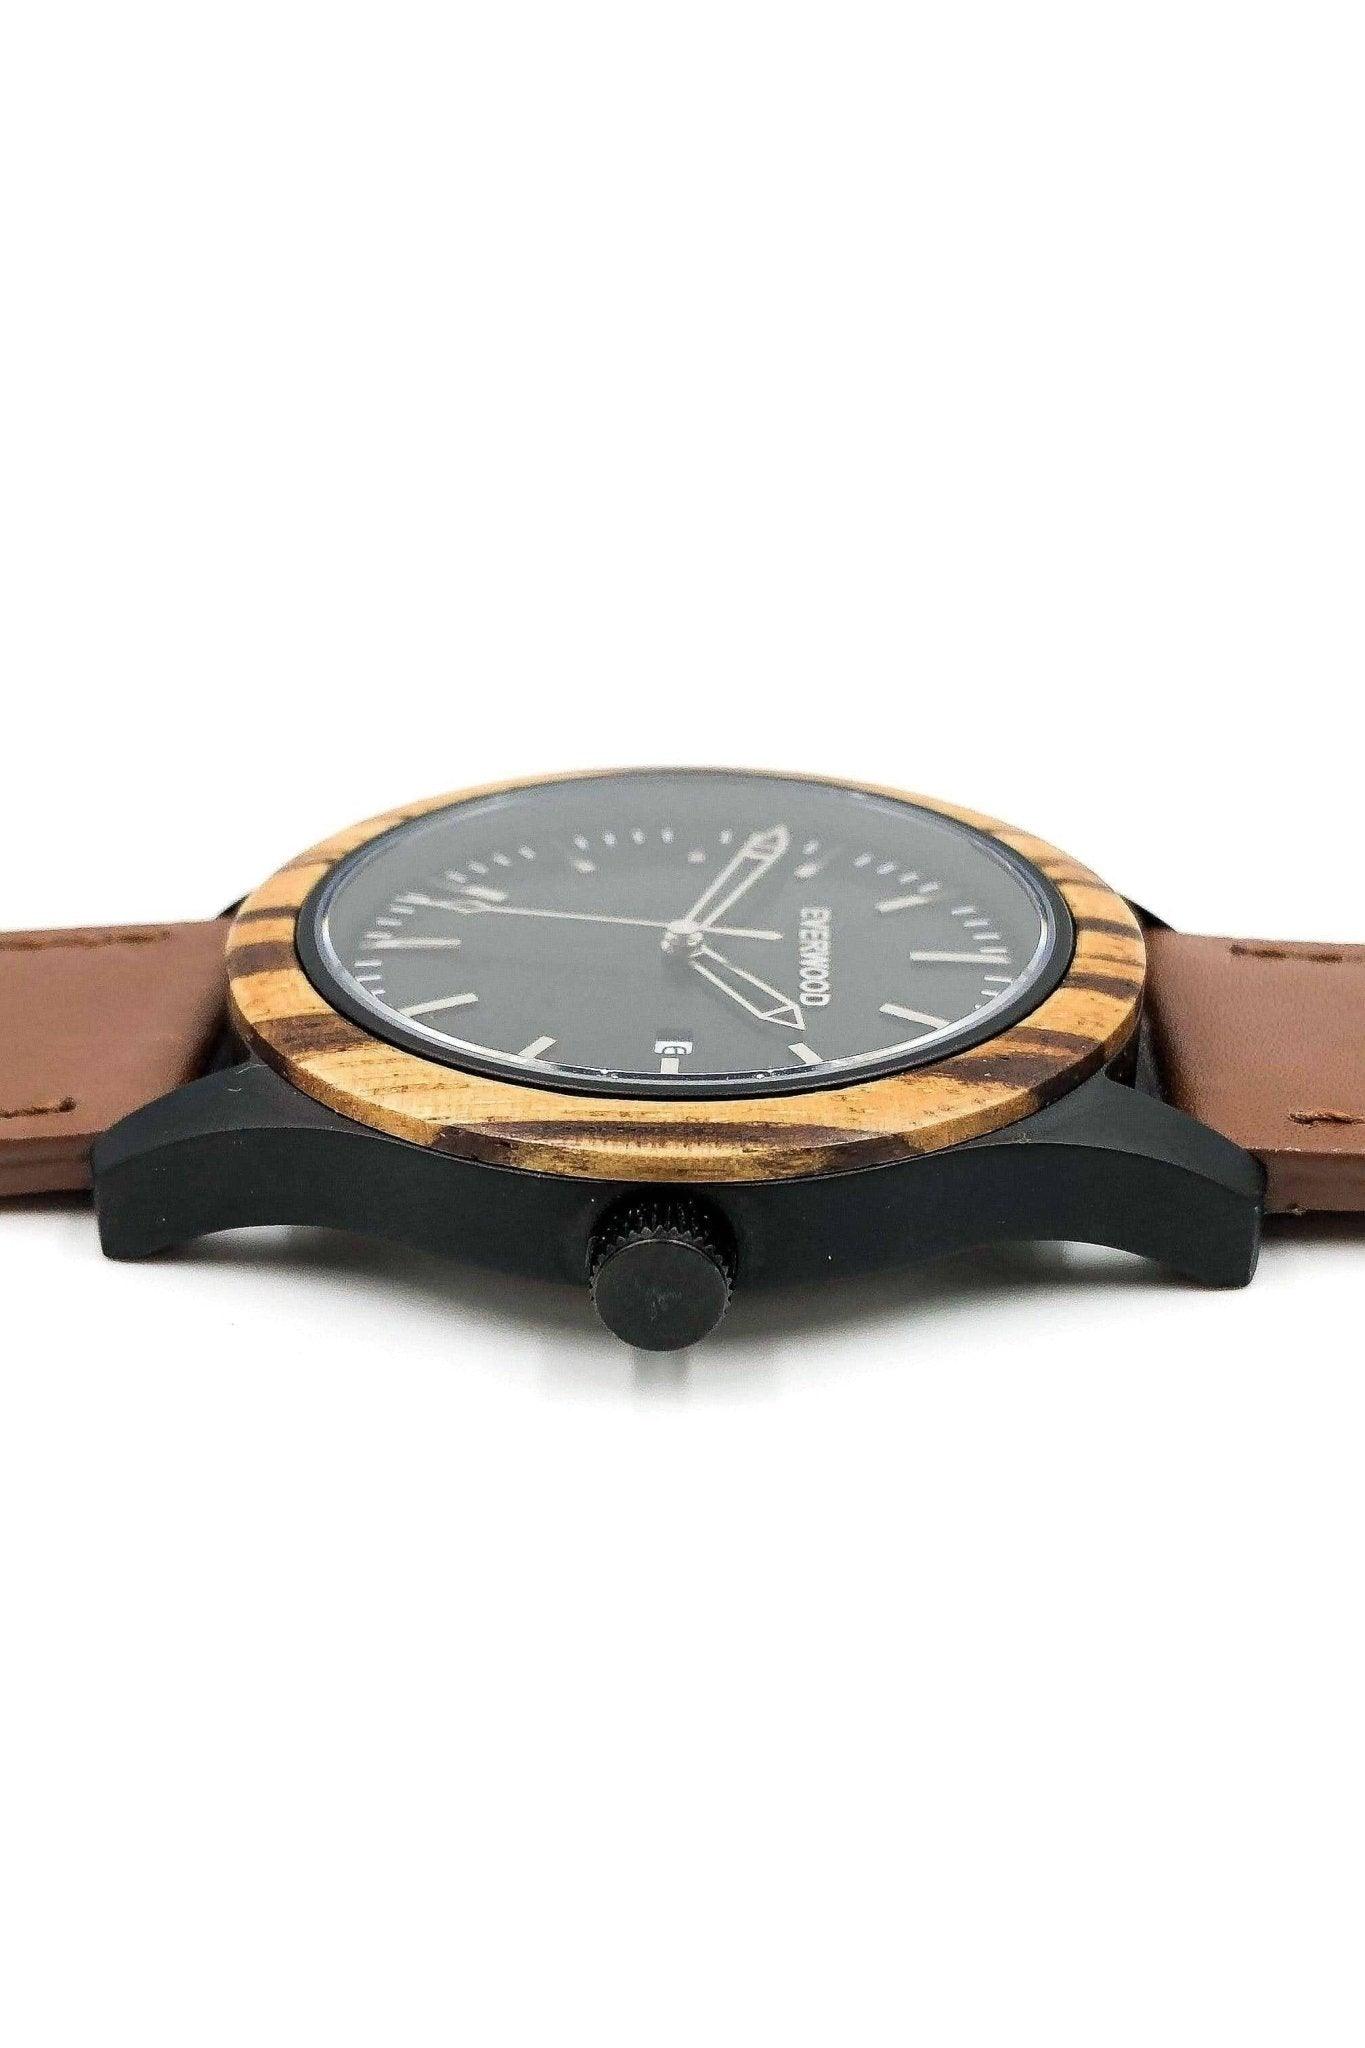 Inverness Zebrawood Brown Leather Men's Watch